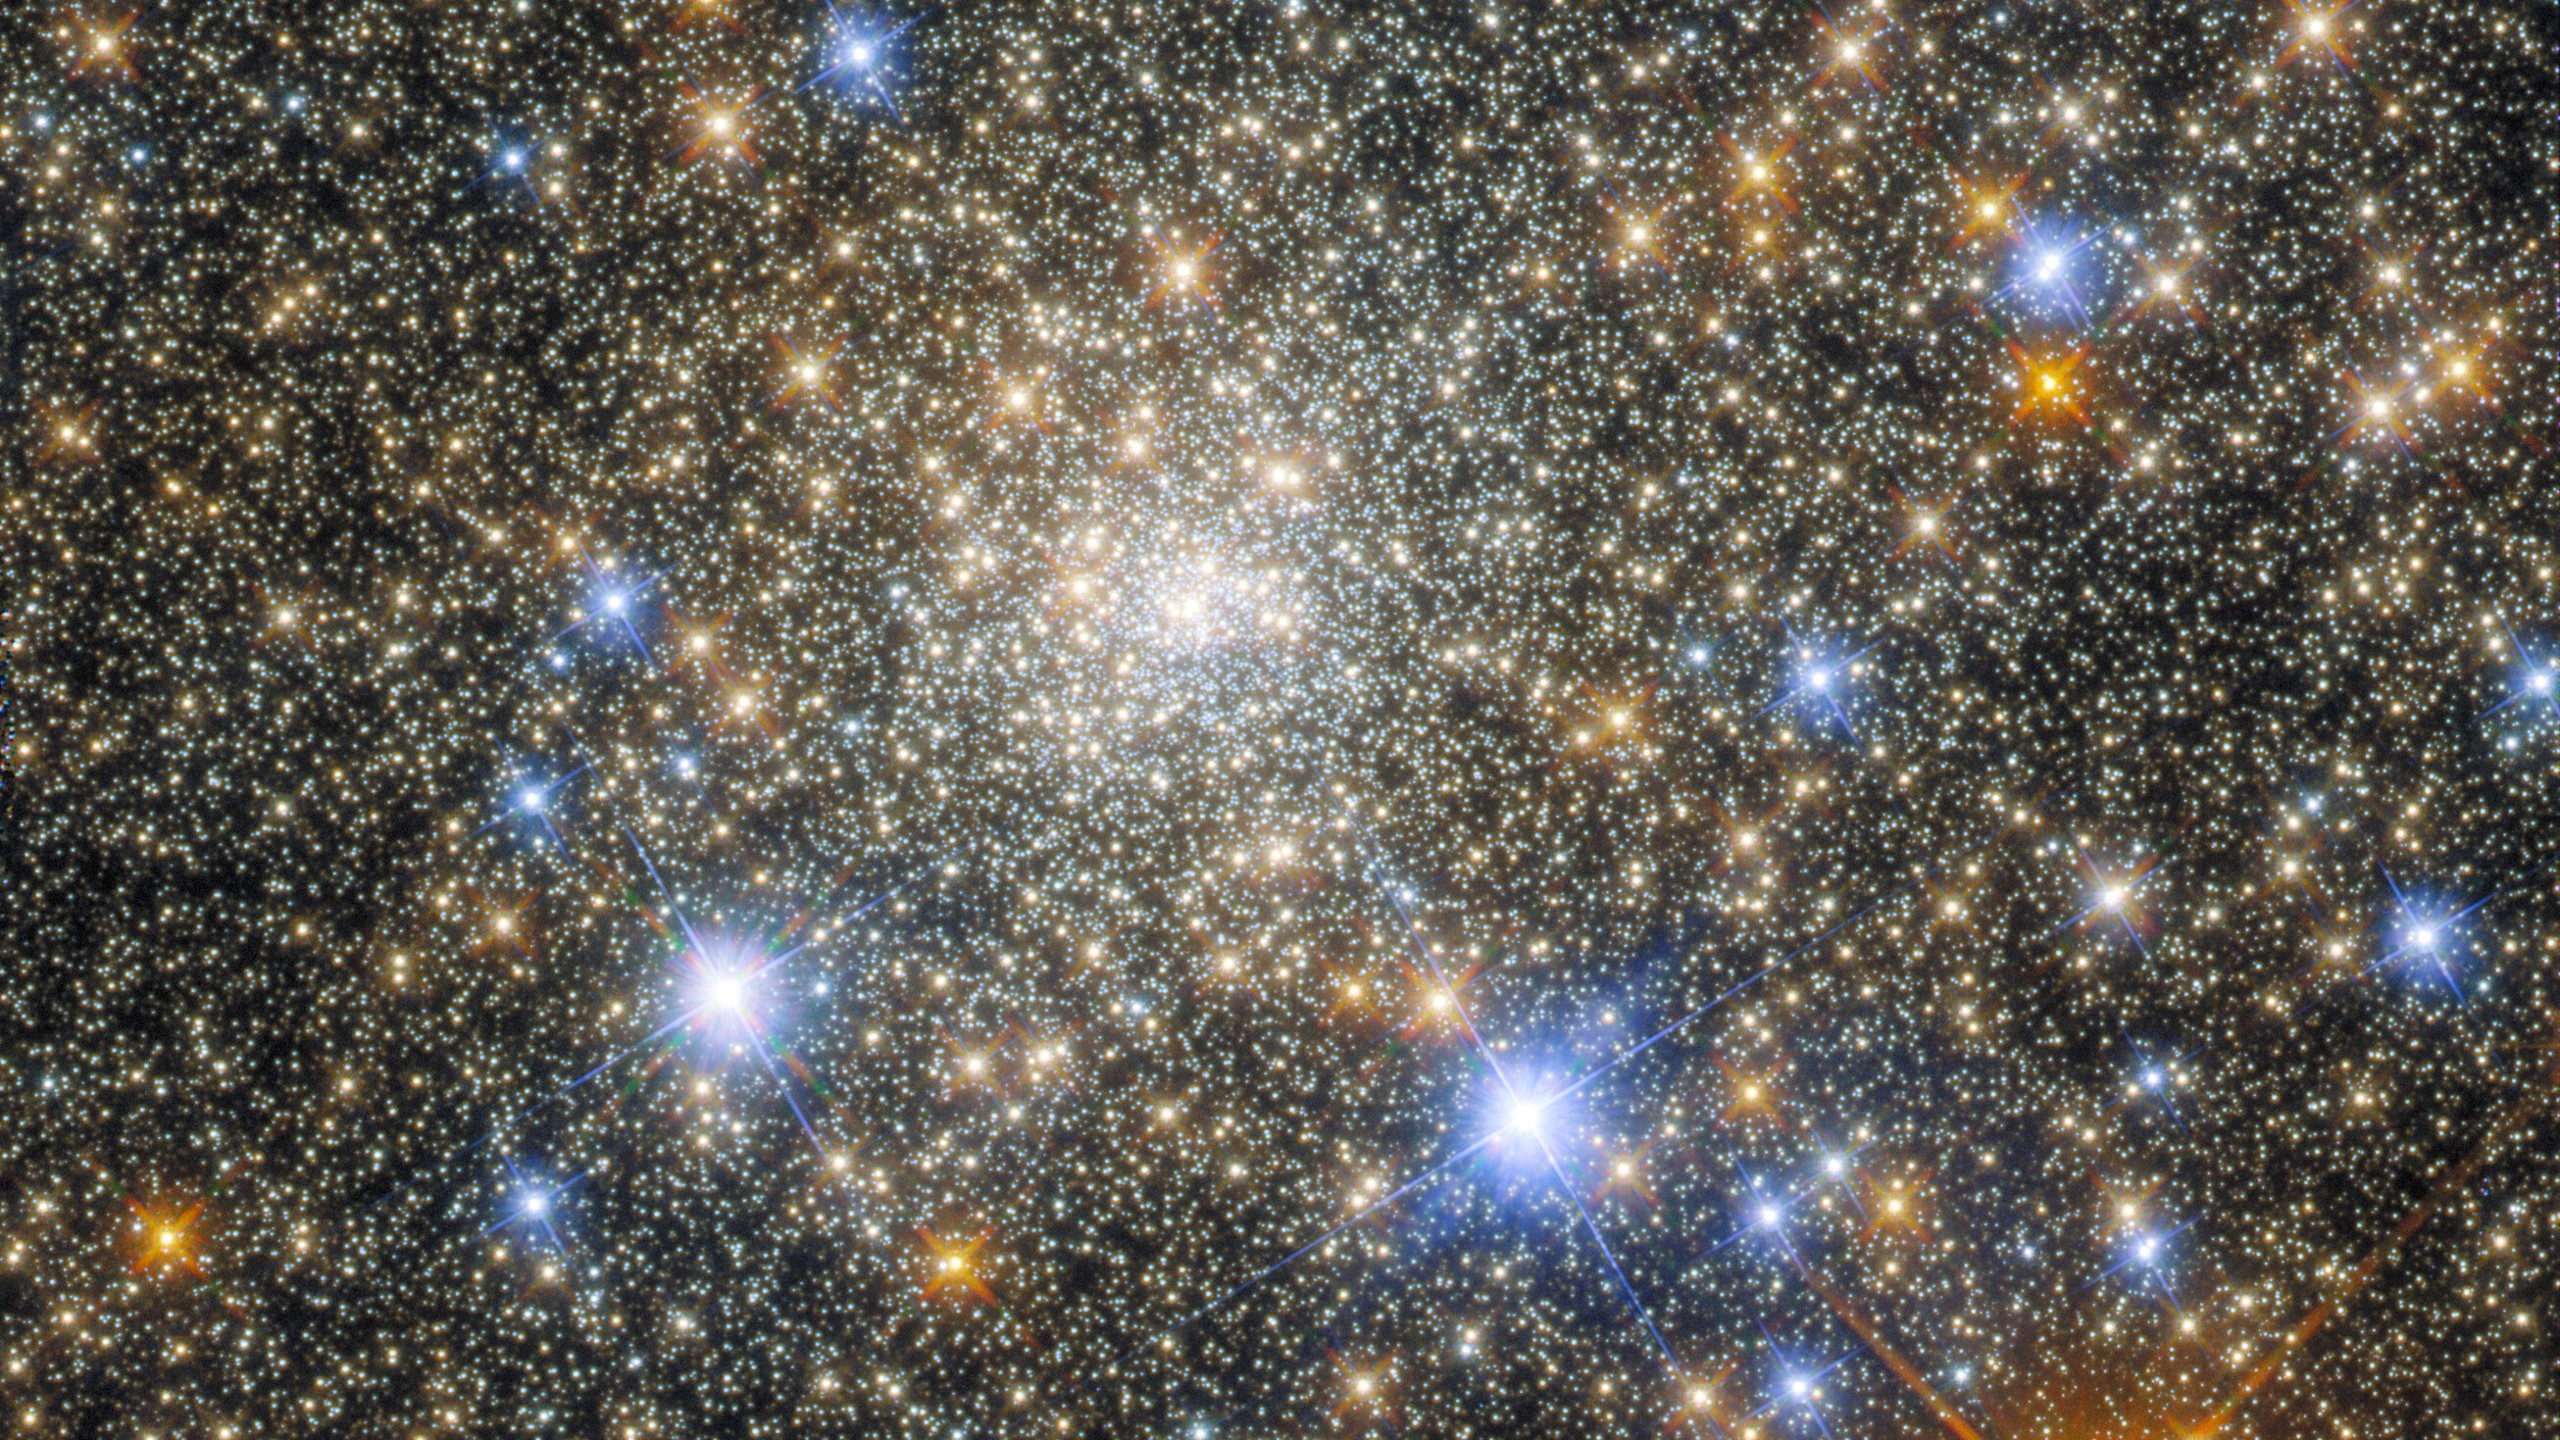 An incredibly densely packed field of stars can be seen.